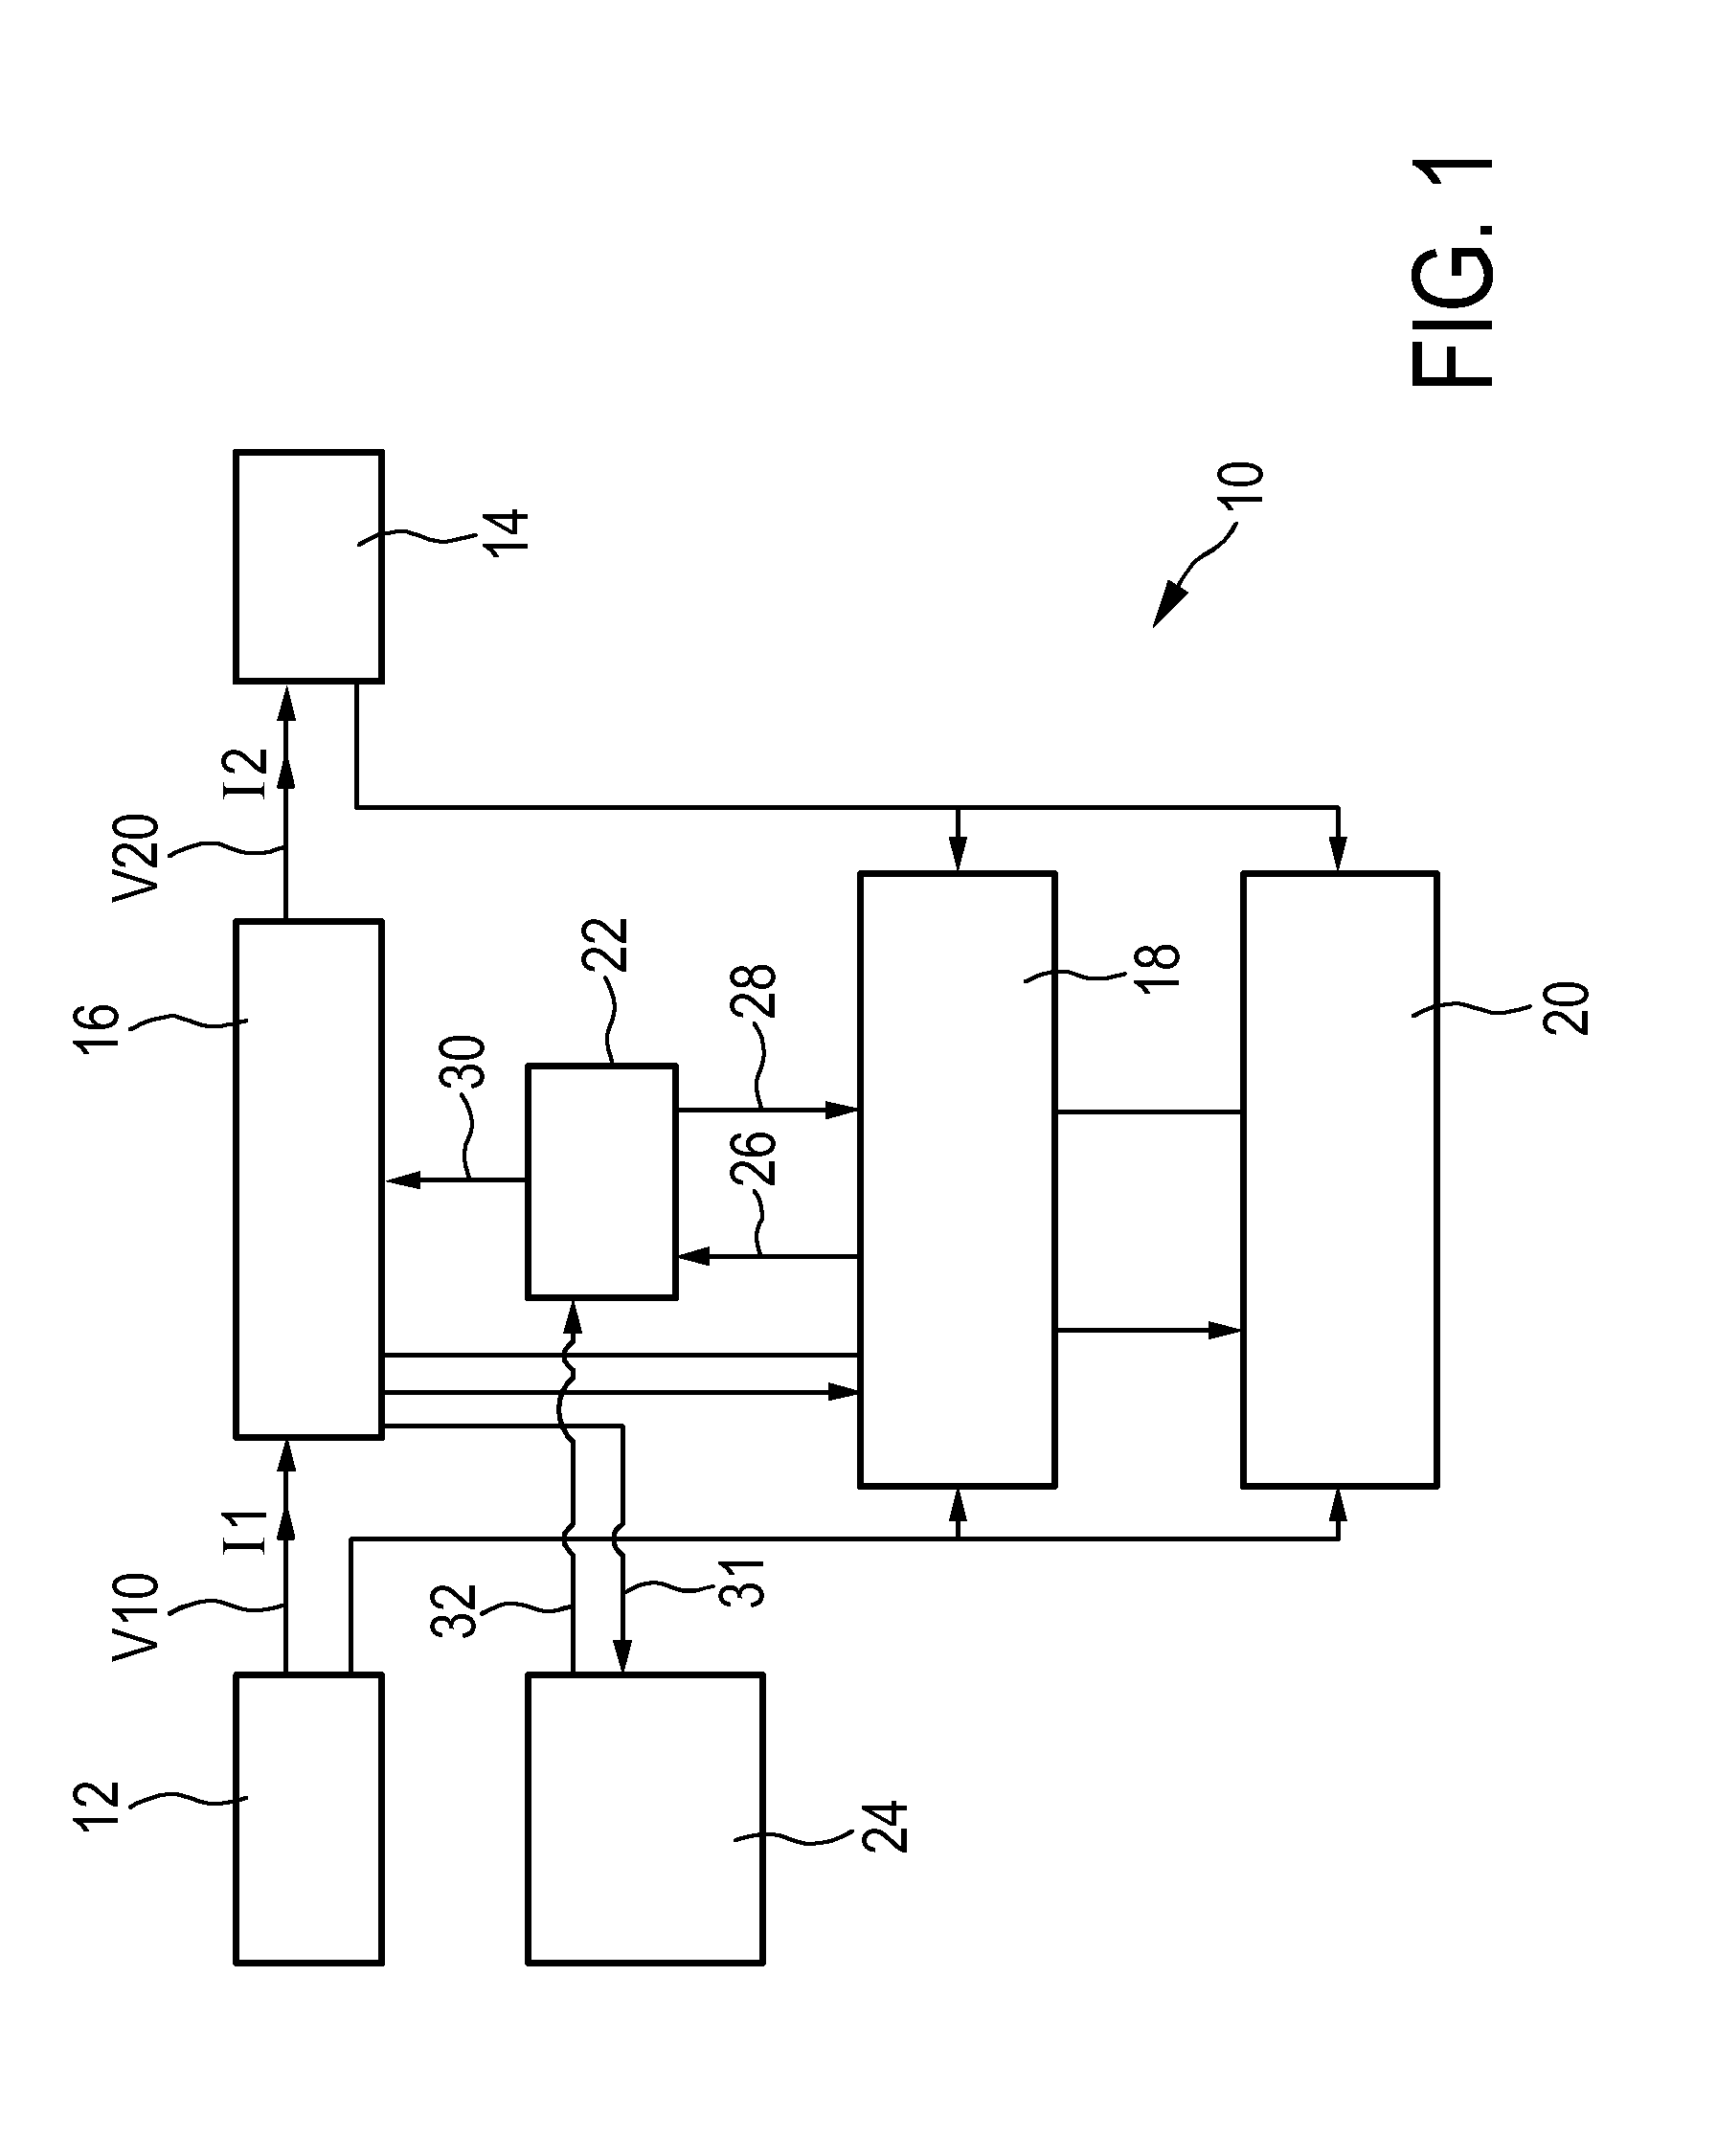 Driver device and driving method for driving a load, in particular a light unit